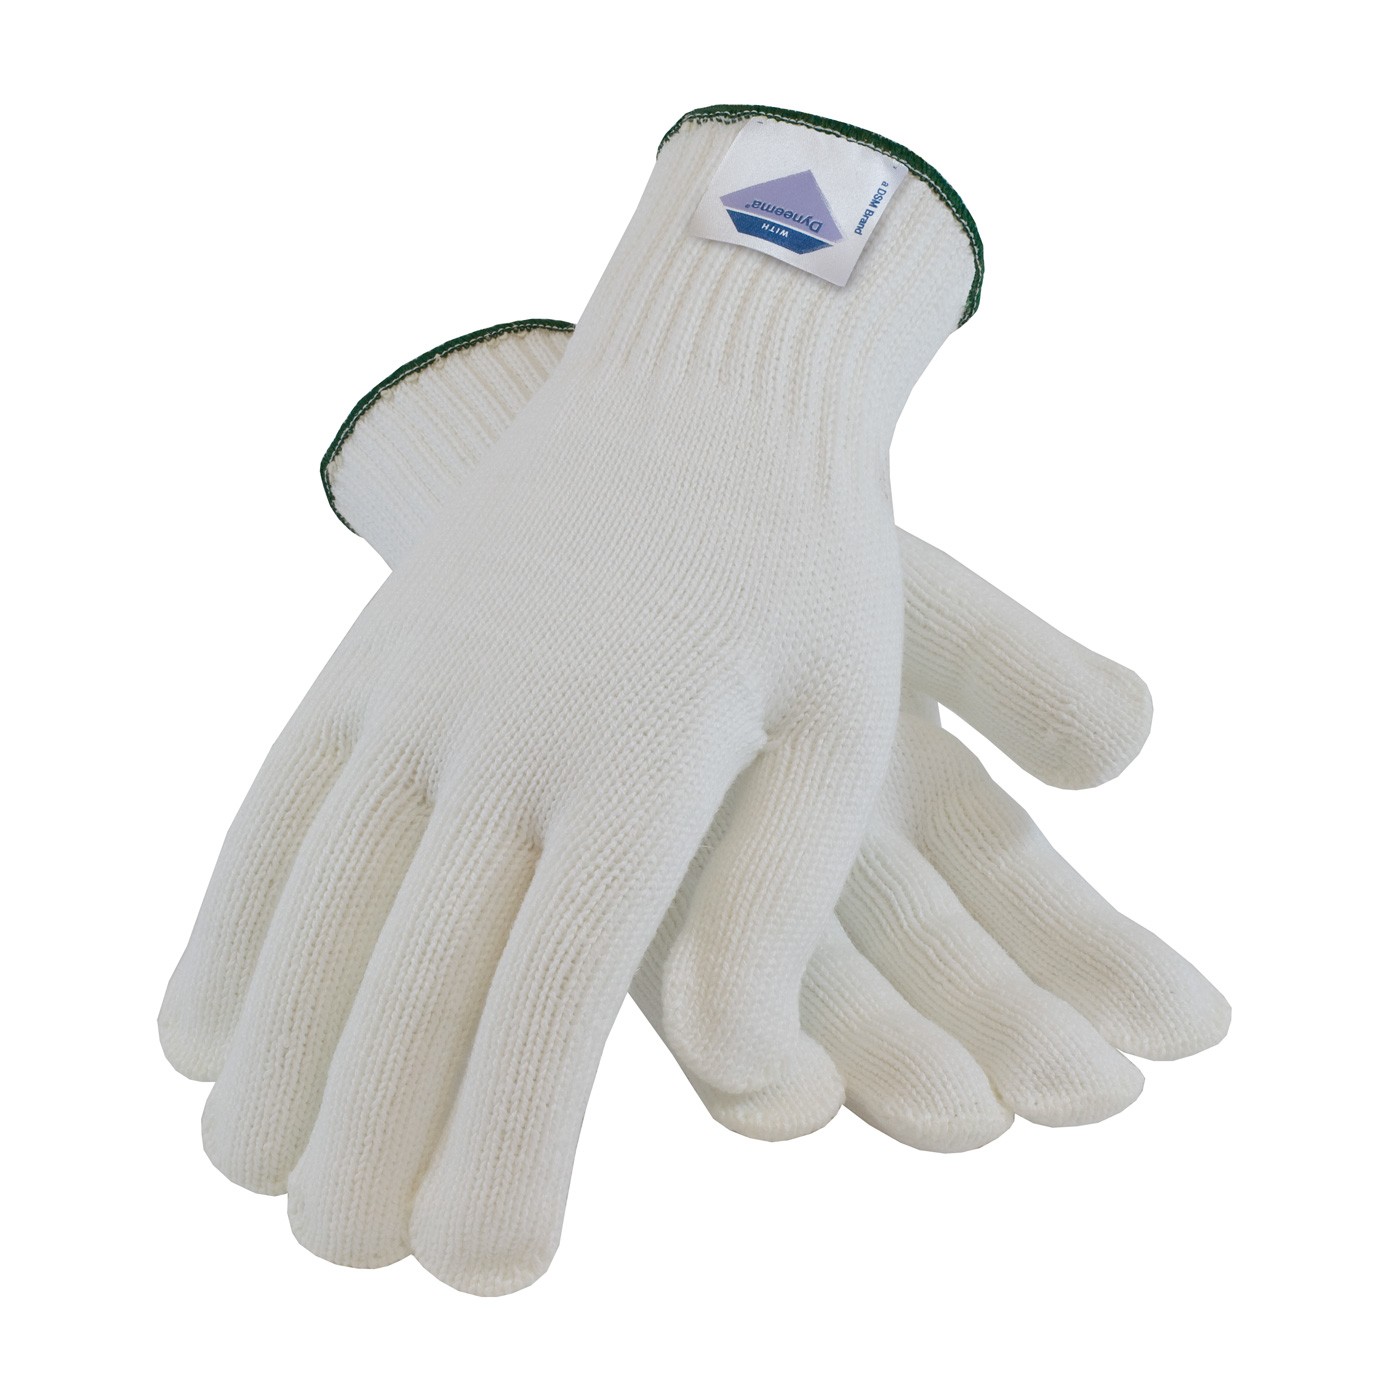 Gloves with Spun Dyneema, 7 Gauge, White, Heavy Weight, ANSI2 Size X-Large